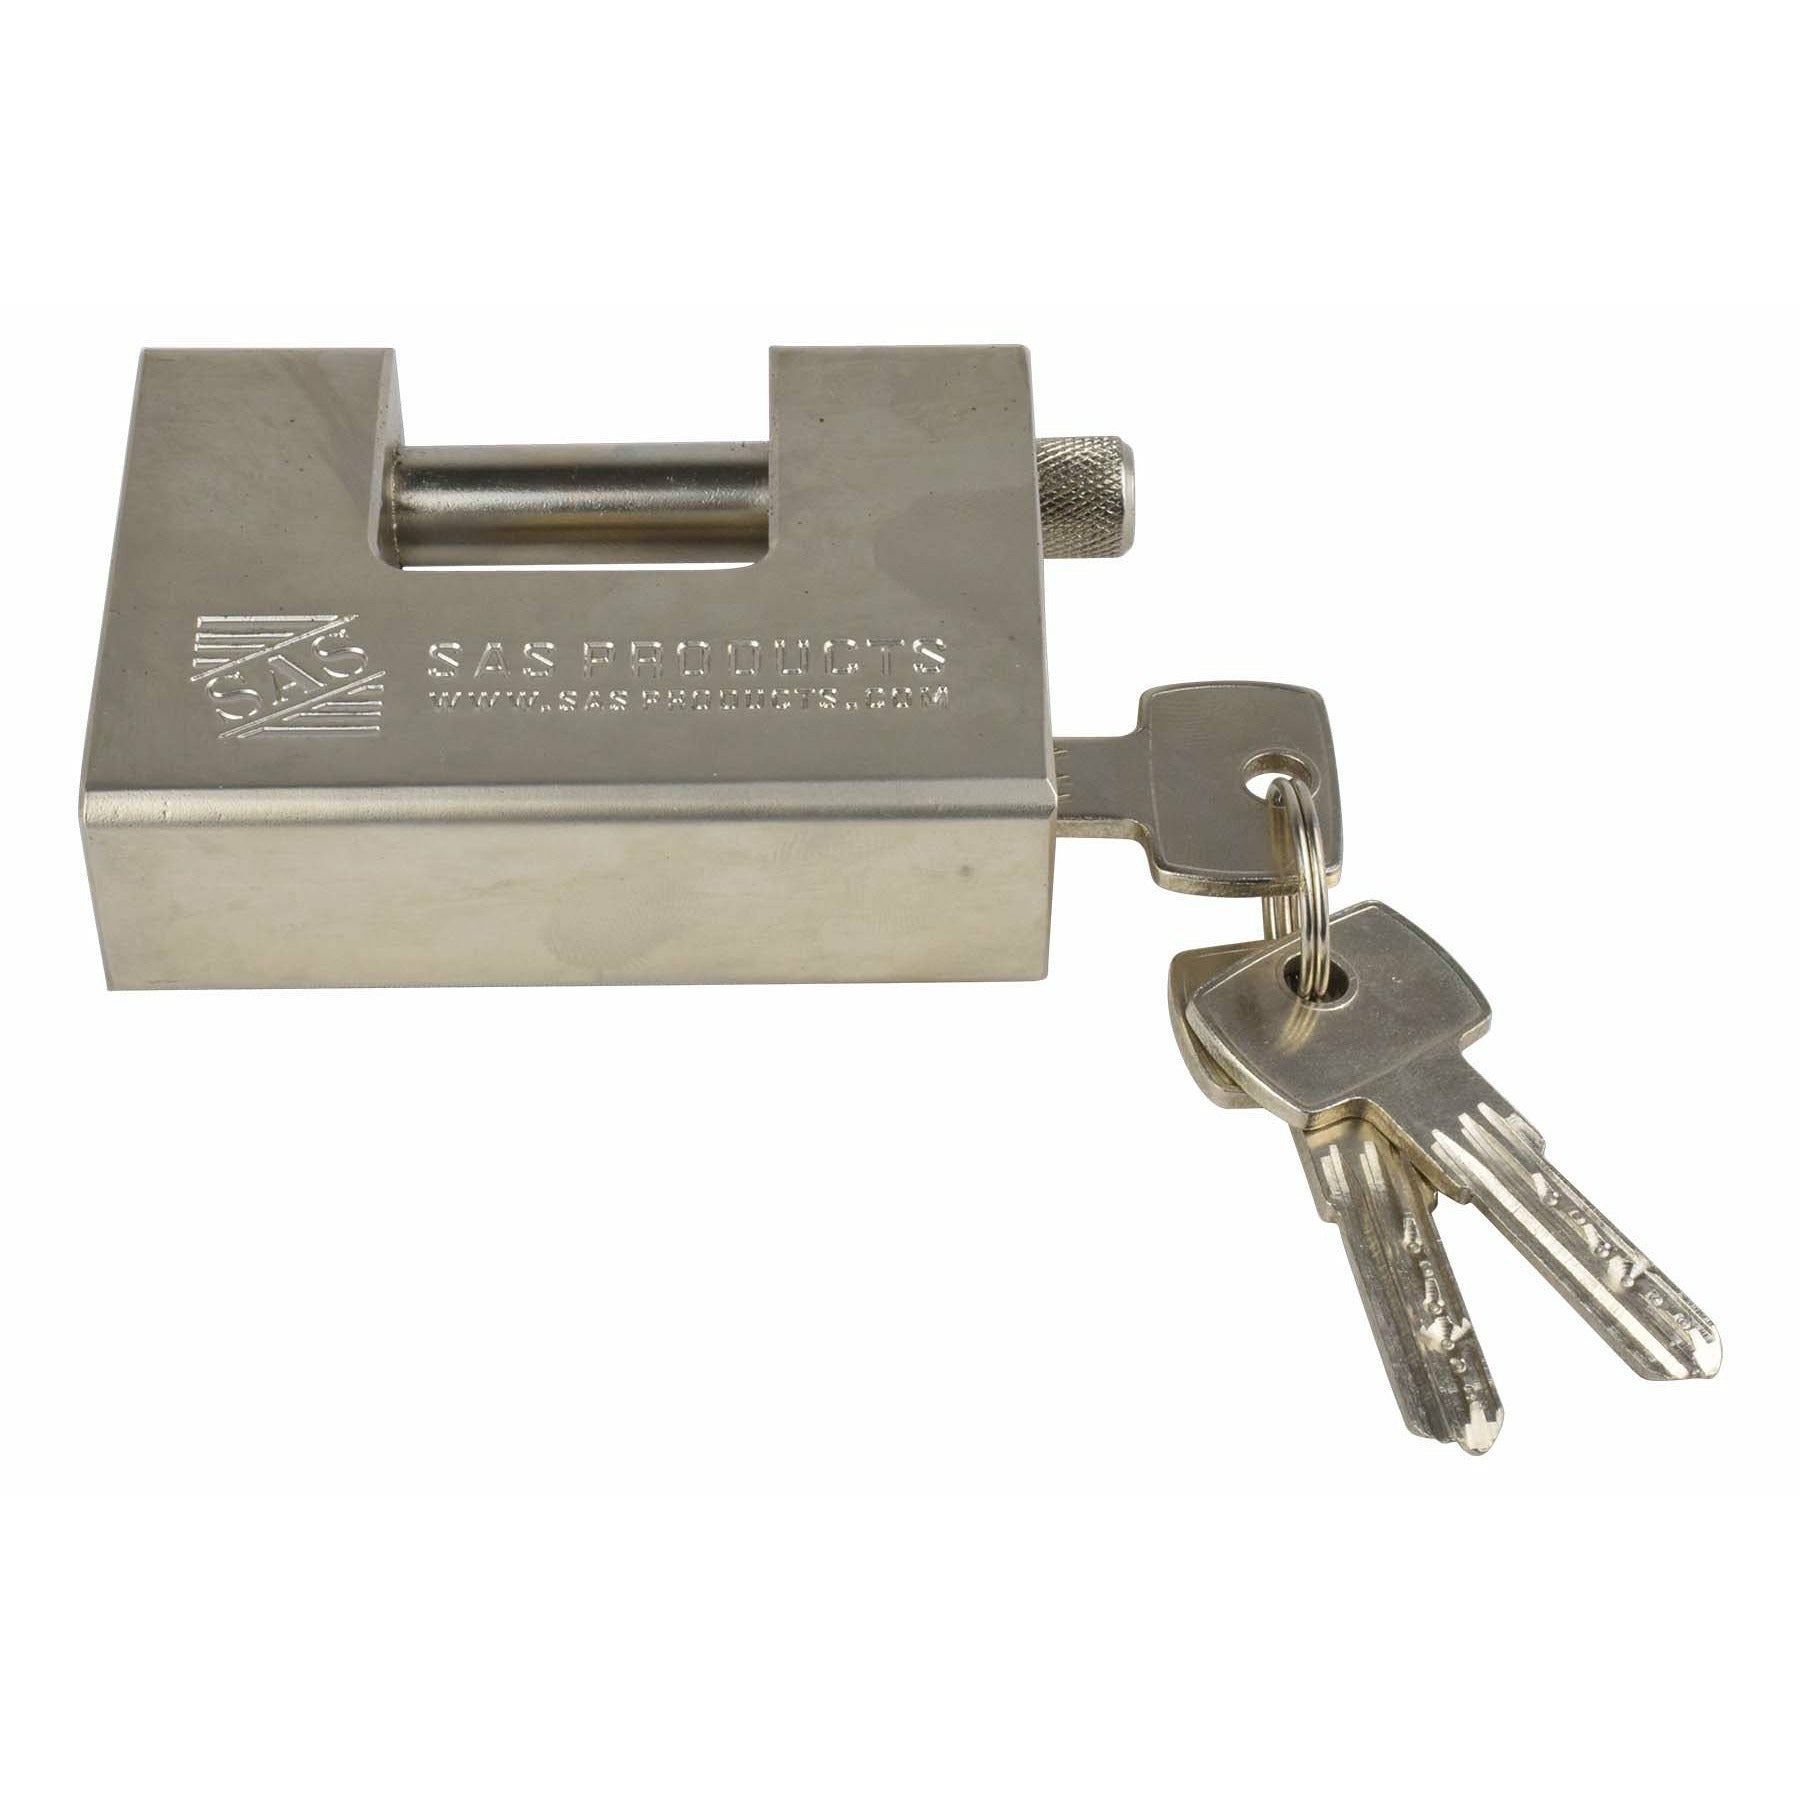 C-Type Padlock for Chains or Cables